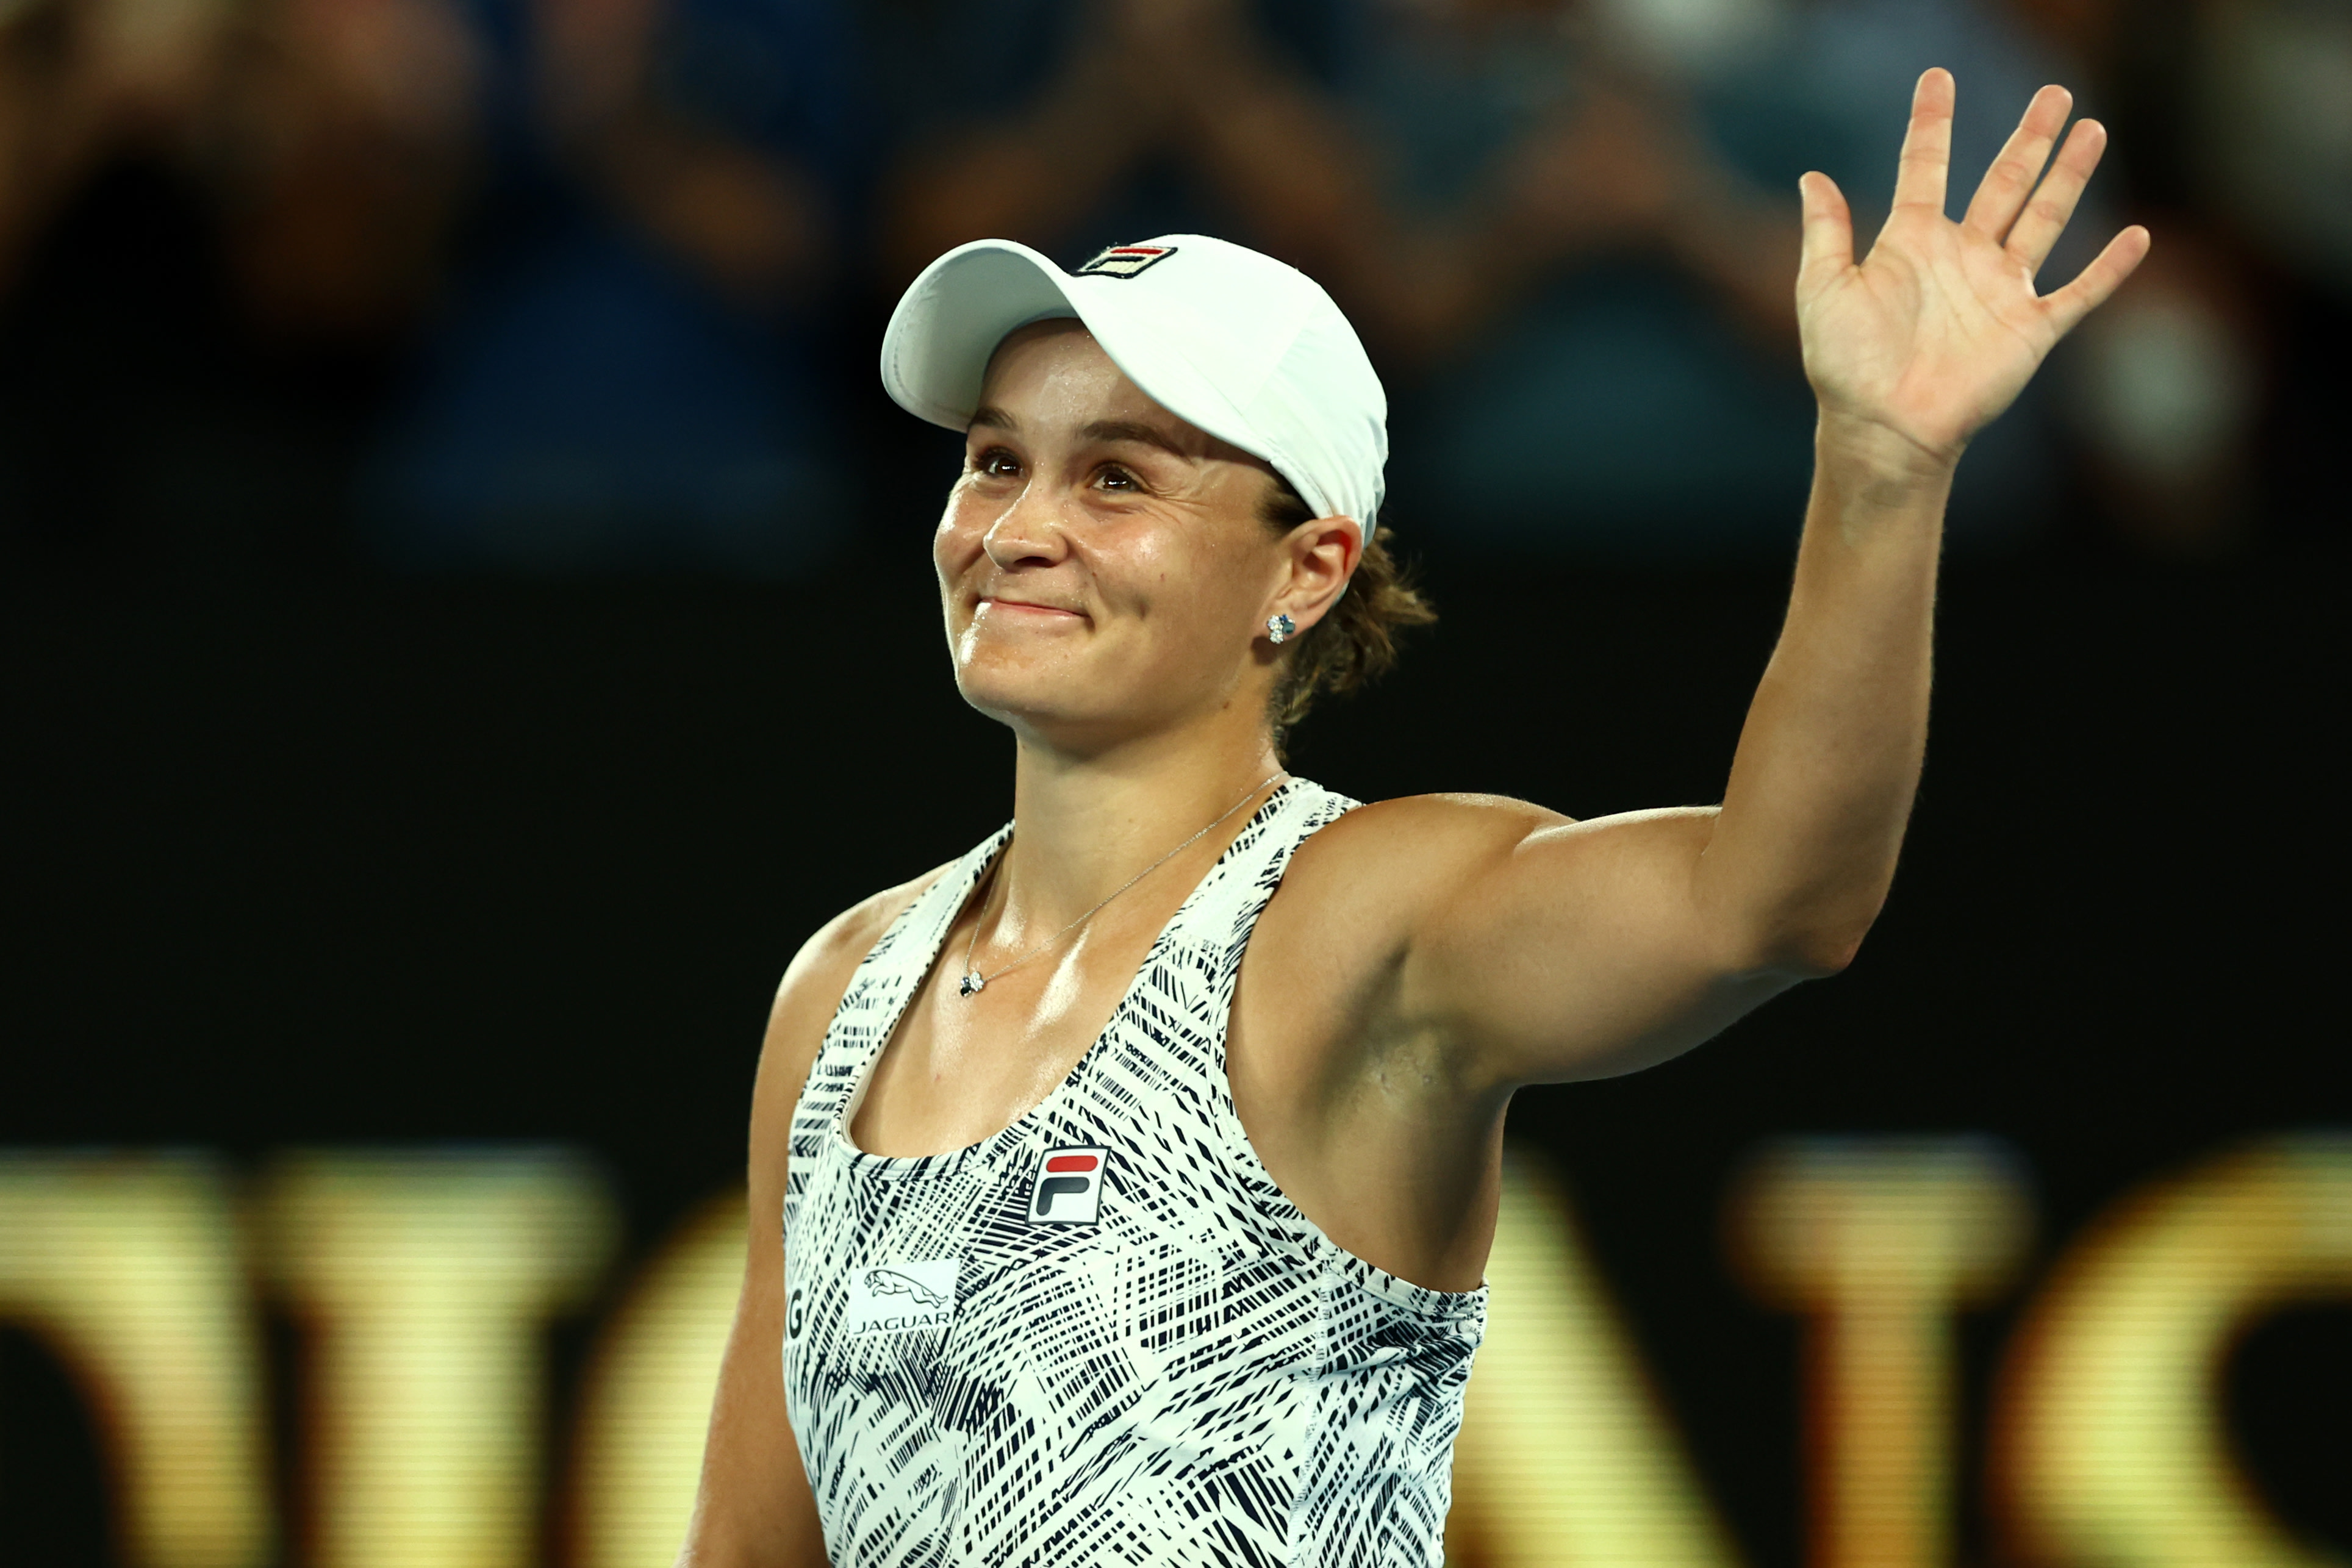 Going out on top Even in retirement, Ashleigh Barty has always stayed true to herself